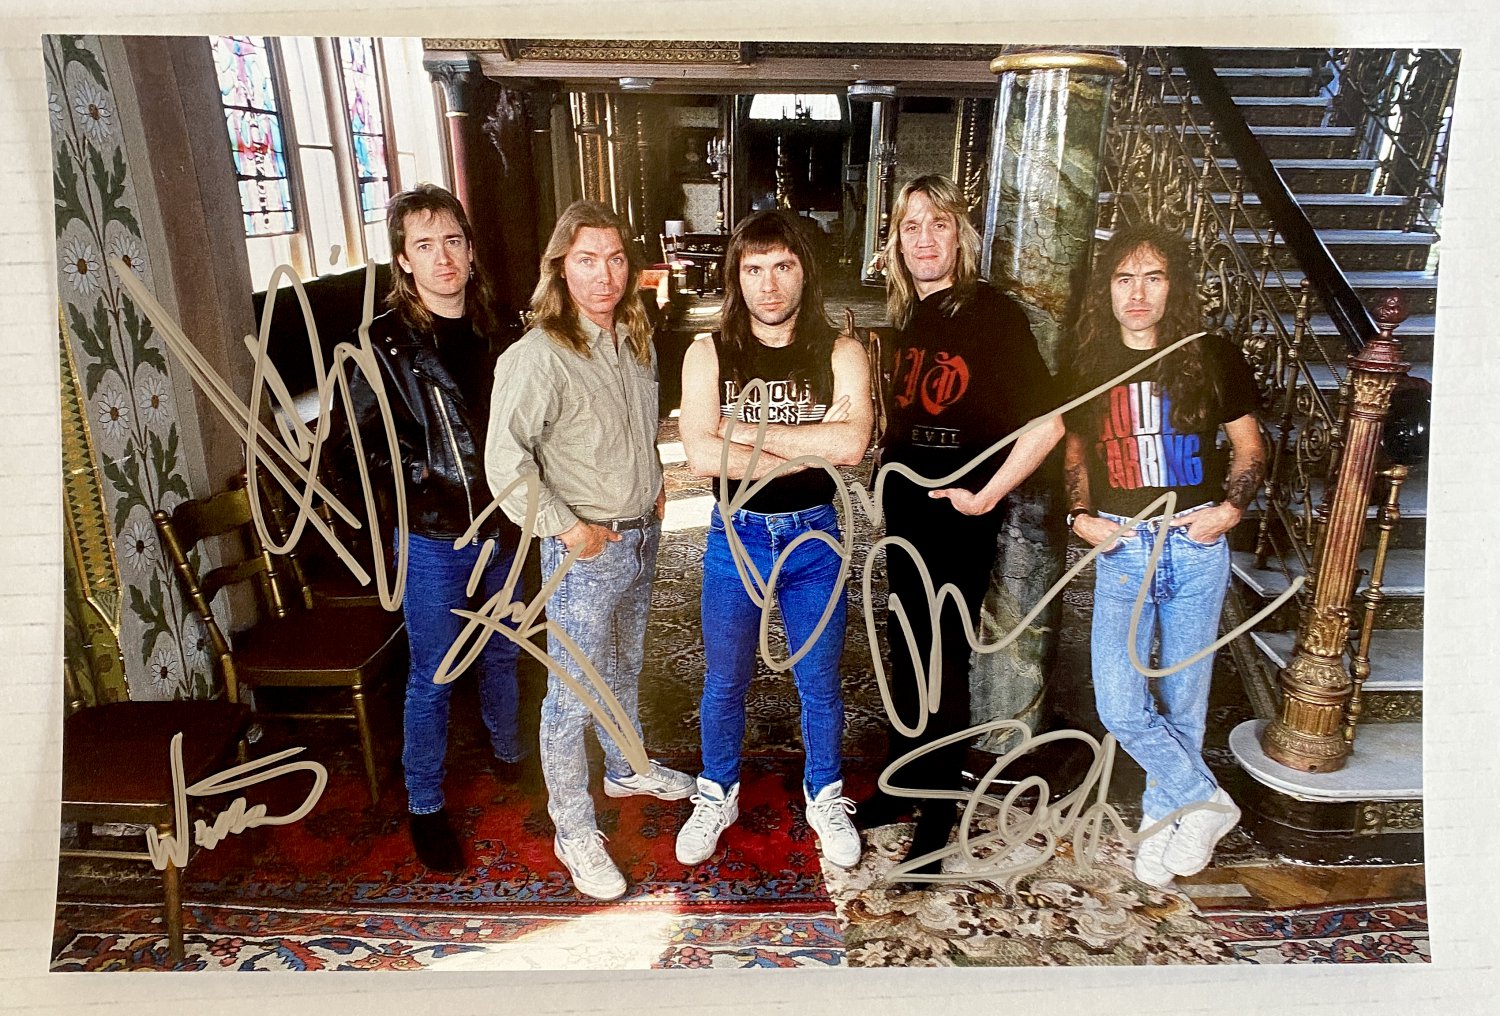 Bruce Dickinson Autographed Photo Singer Songwriter Lead Singer Iron Maiden